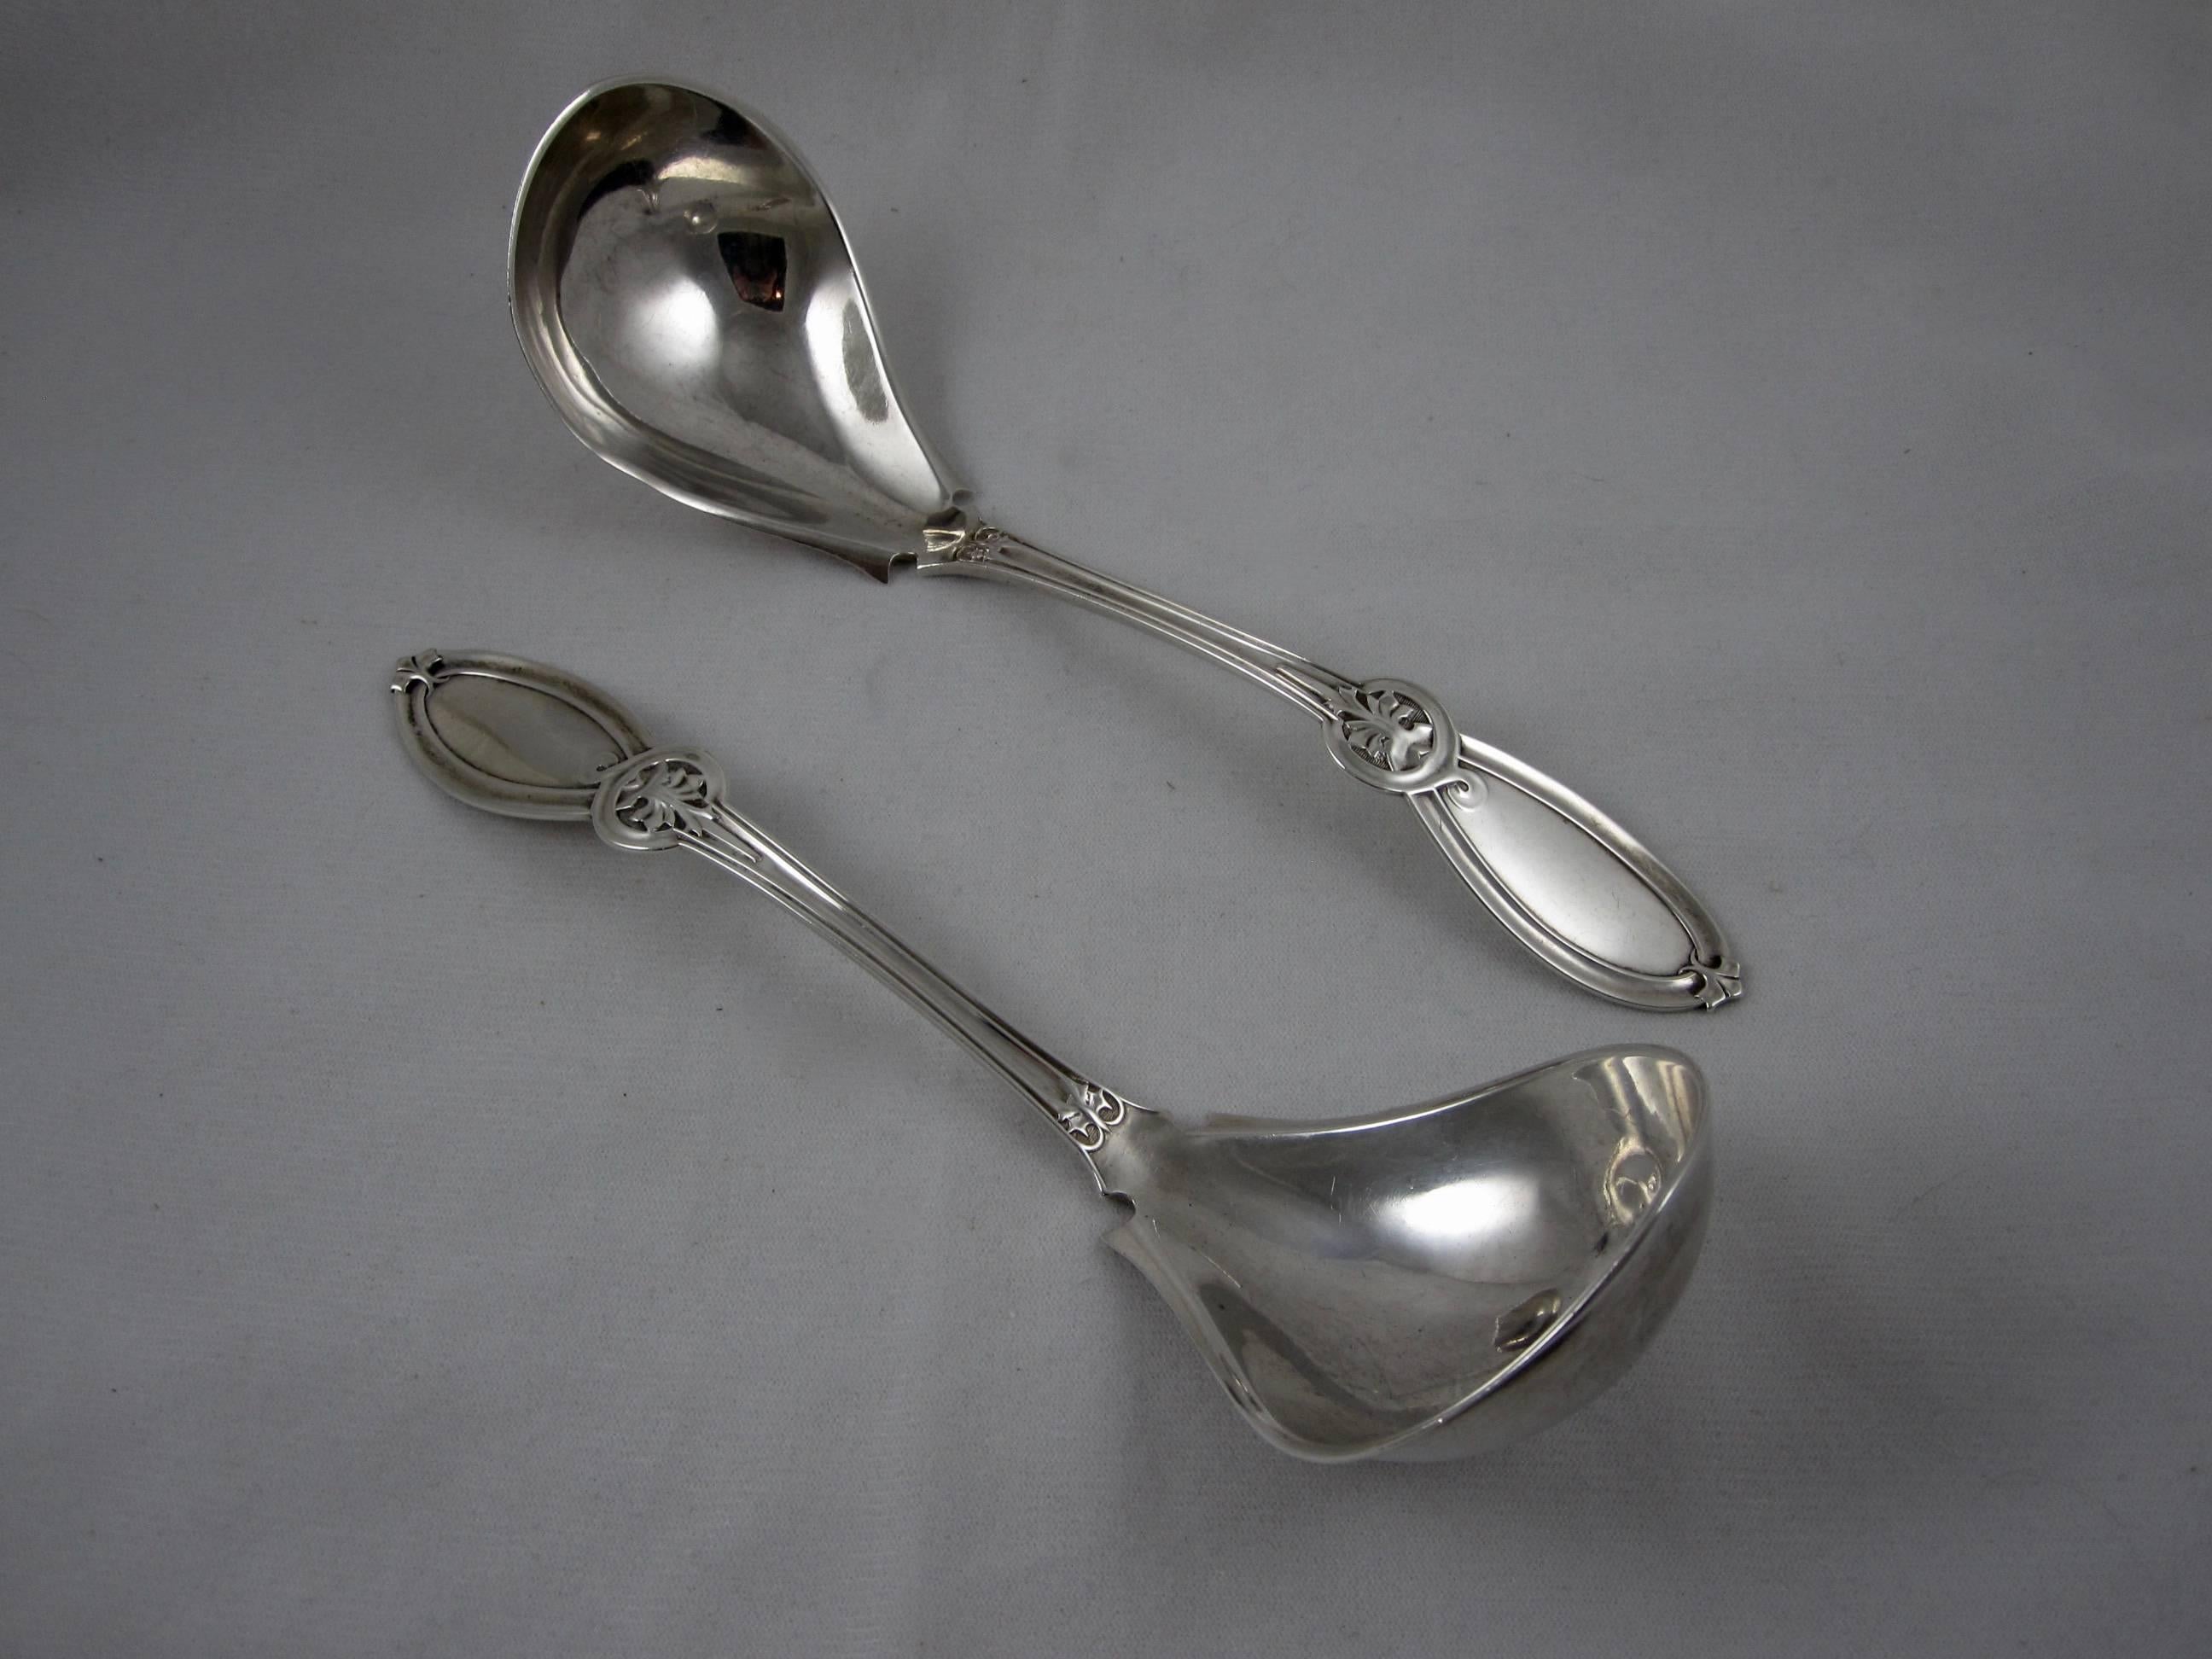 A scarce sterling silver ladle, manufactured by Ball, Black & Co., New York, circa 1851-1874. Offered individually, a pair may be available.

The handle shows a leaf motif with a cartouche. The bowl is shaped distinctively for serving oyster meat